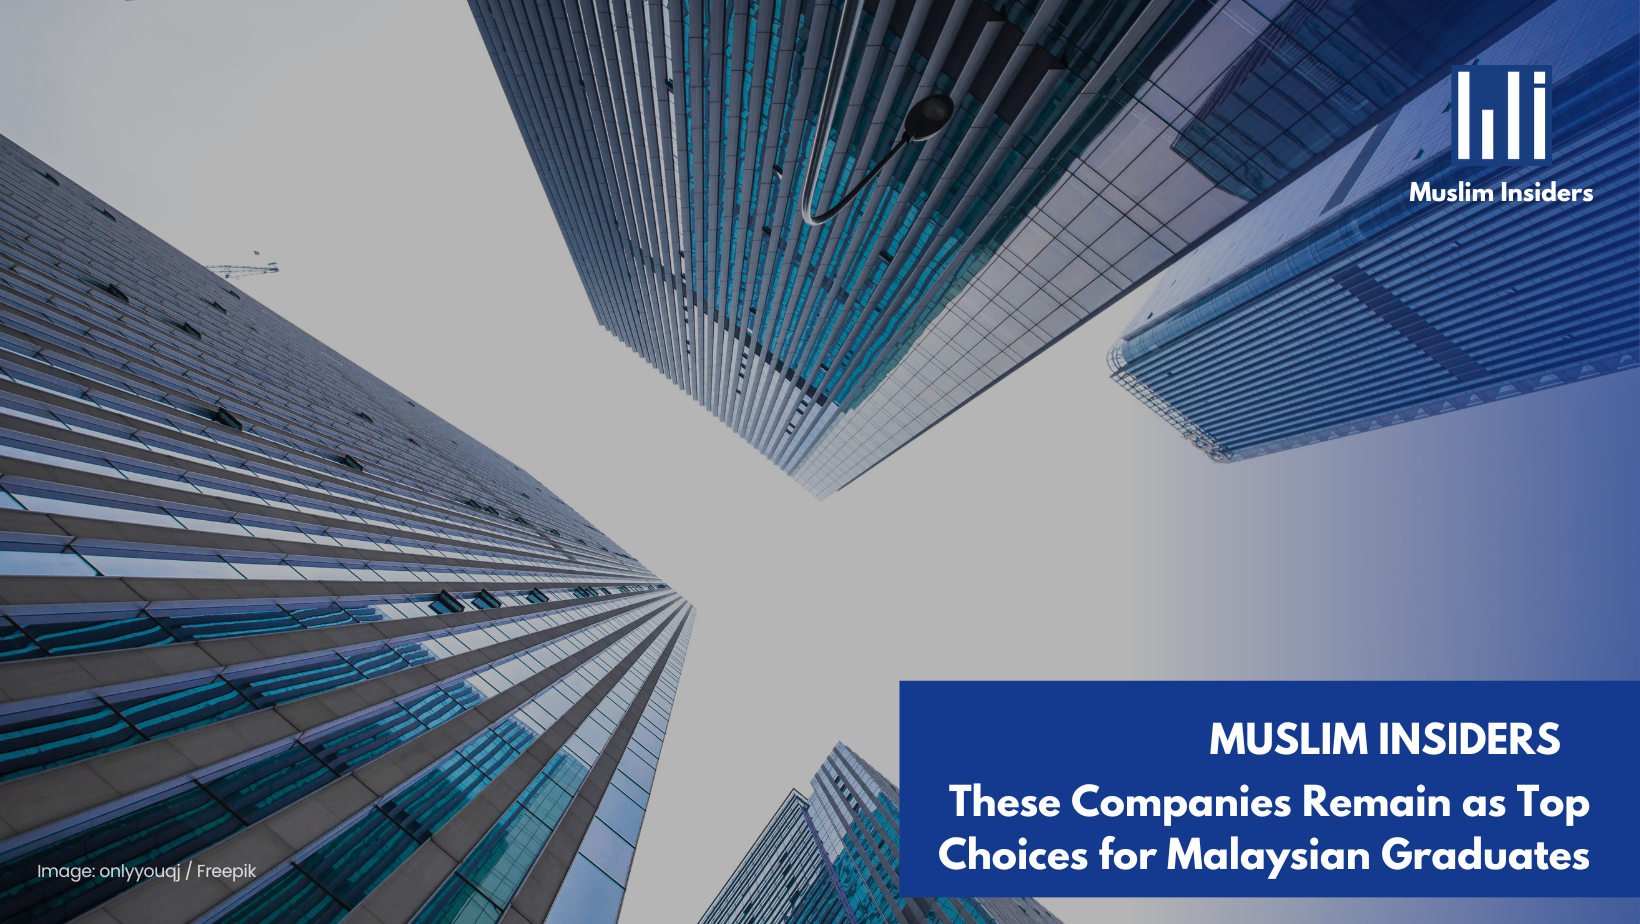 These Companies Remain as Top Choices for Malaysian Graduates